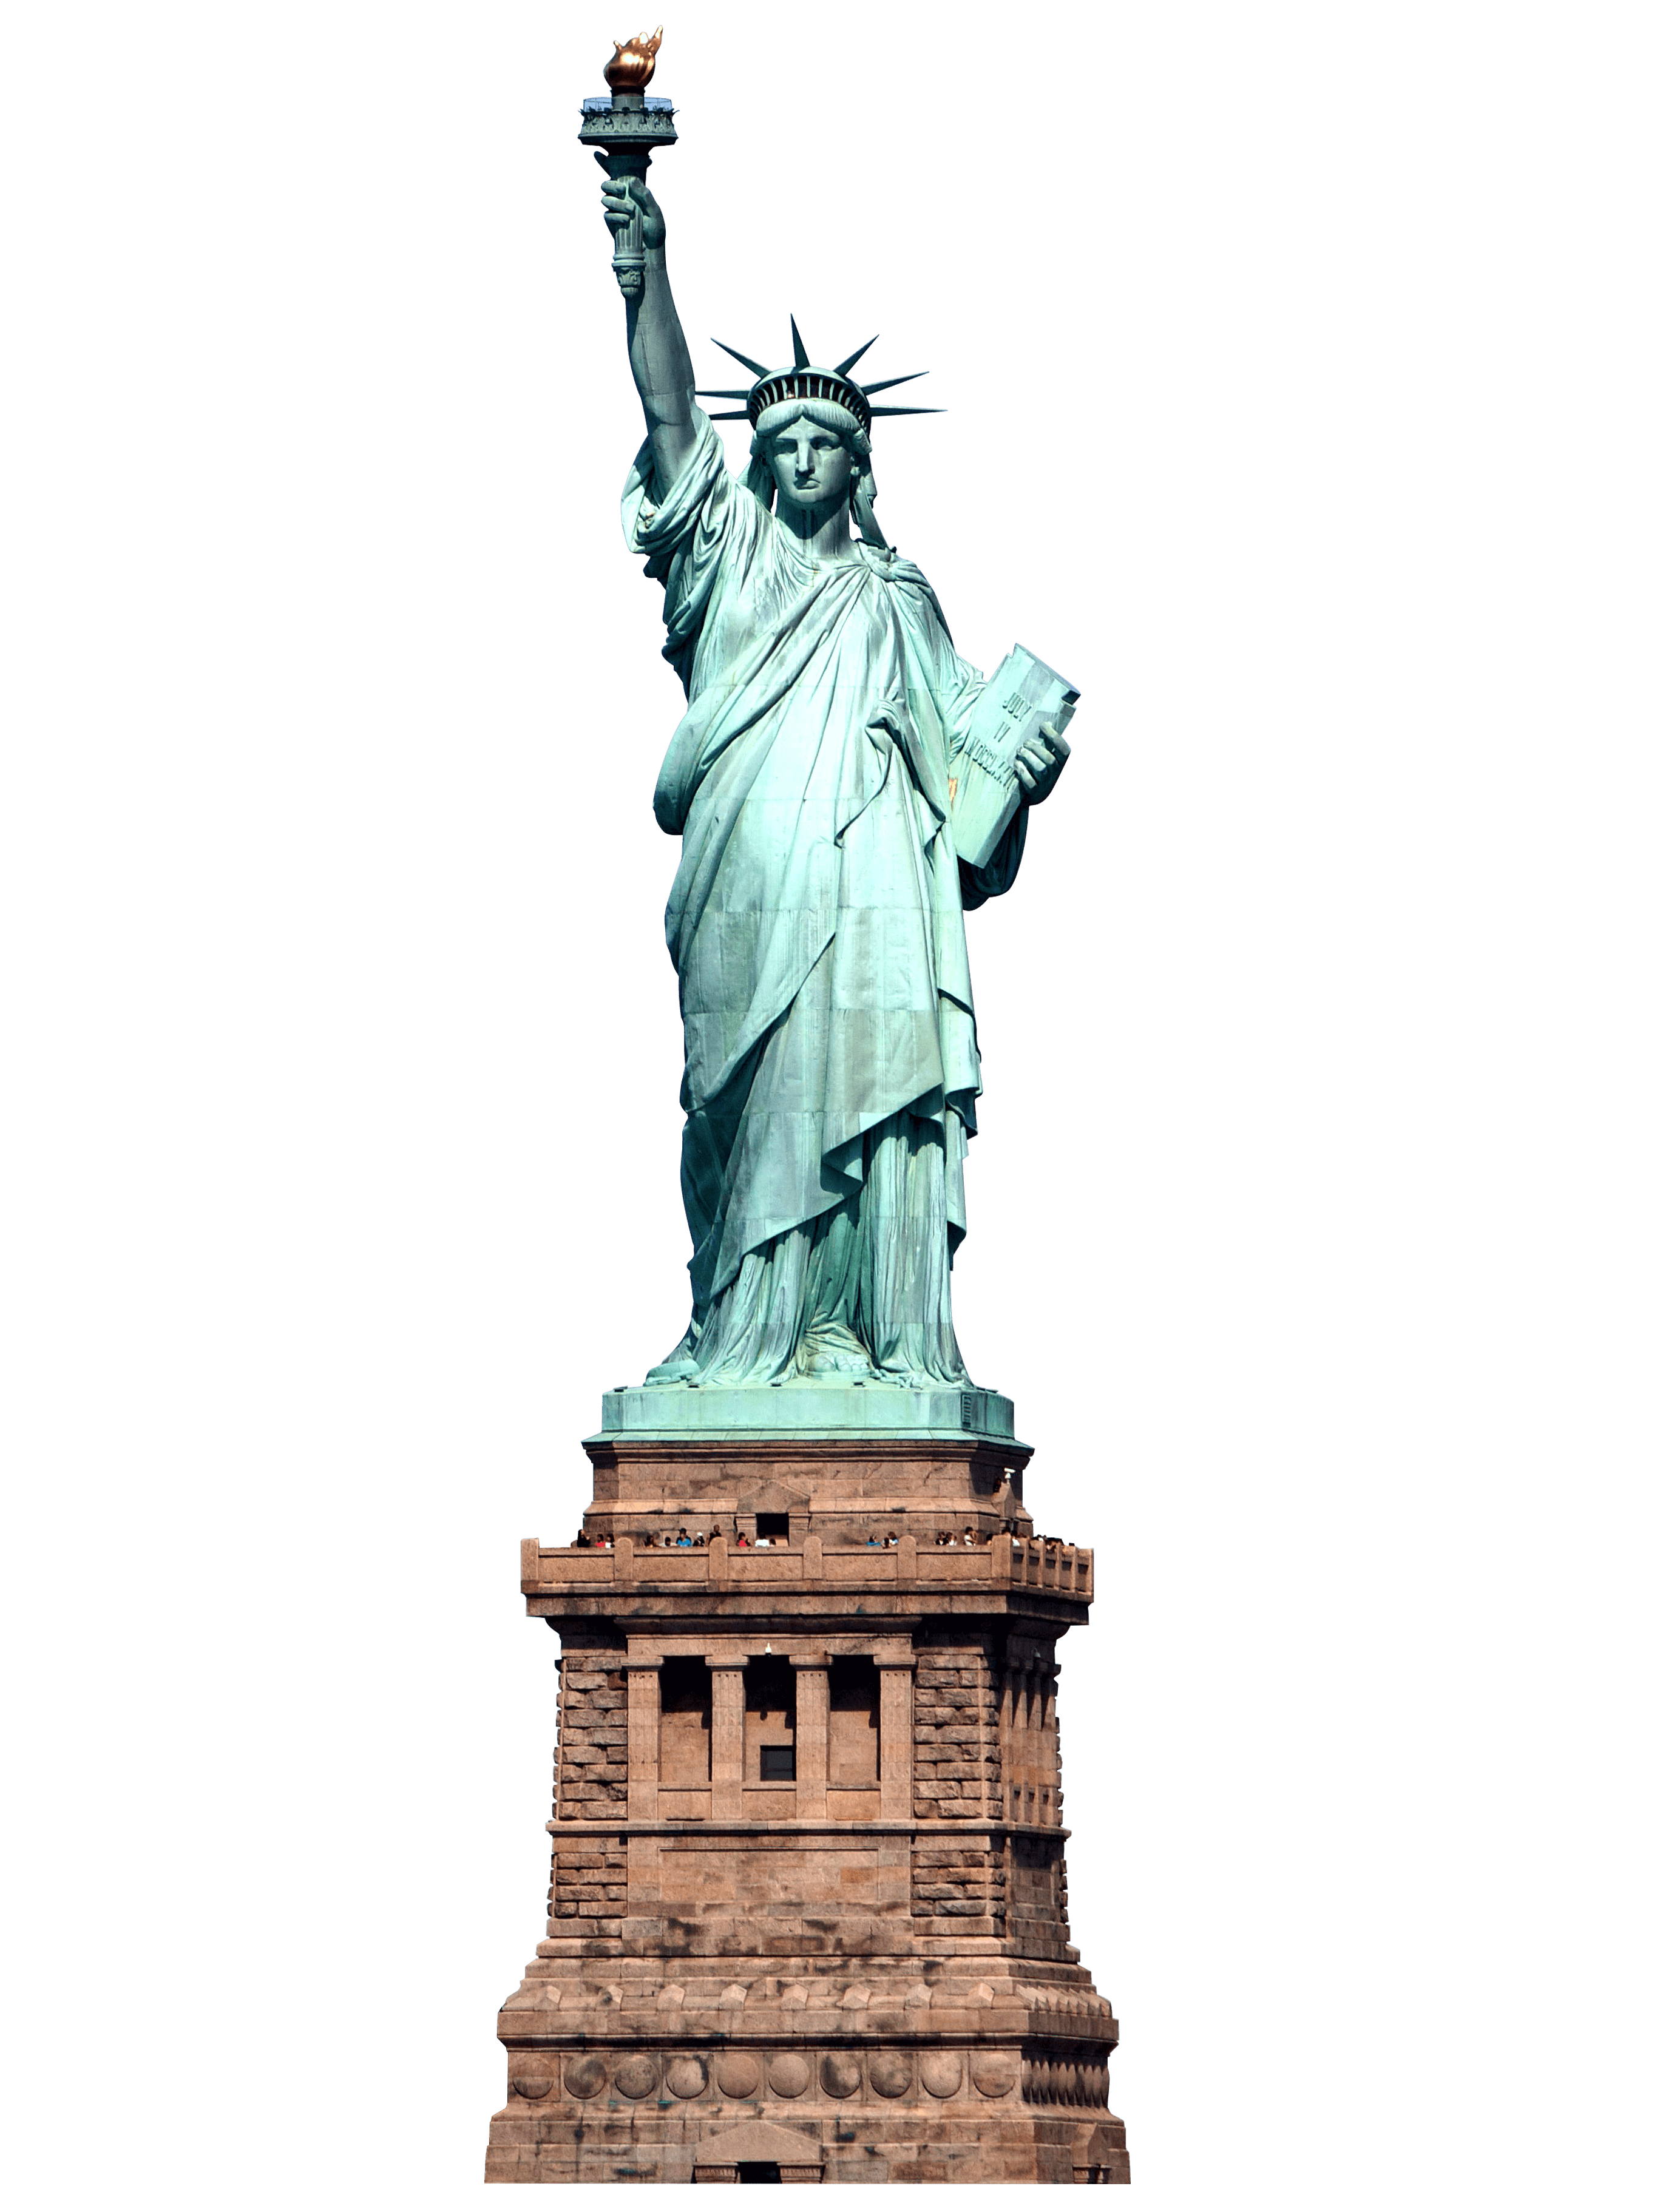 statue of liberty png, statue of liberty png transparent, statue of liberty png images, statue of liberty png hd, statue of liberty png gif, statue of liberty silhouette png, statue of liberty vector png, statue of liberty torch png, statue of liberty clipart png, statue of liberty head png, statue of liberty png black, statue of liberty png transparent, statue of liberty png vector, eiffel tower png, statue of liberty png black and white, statue of liberty height,